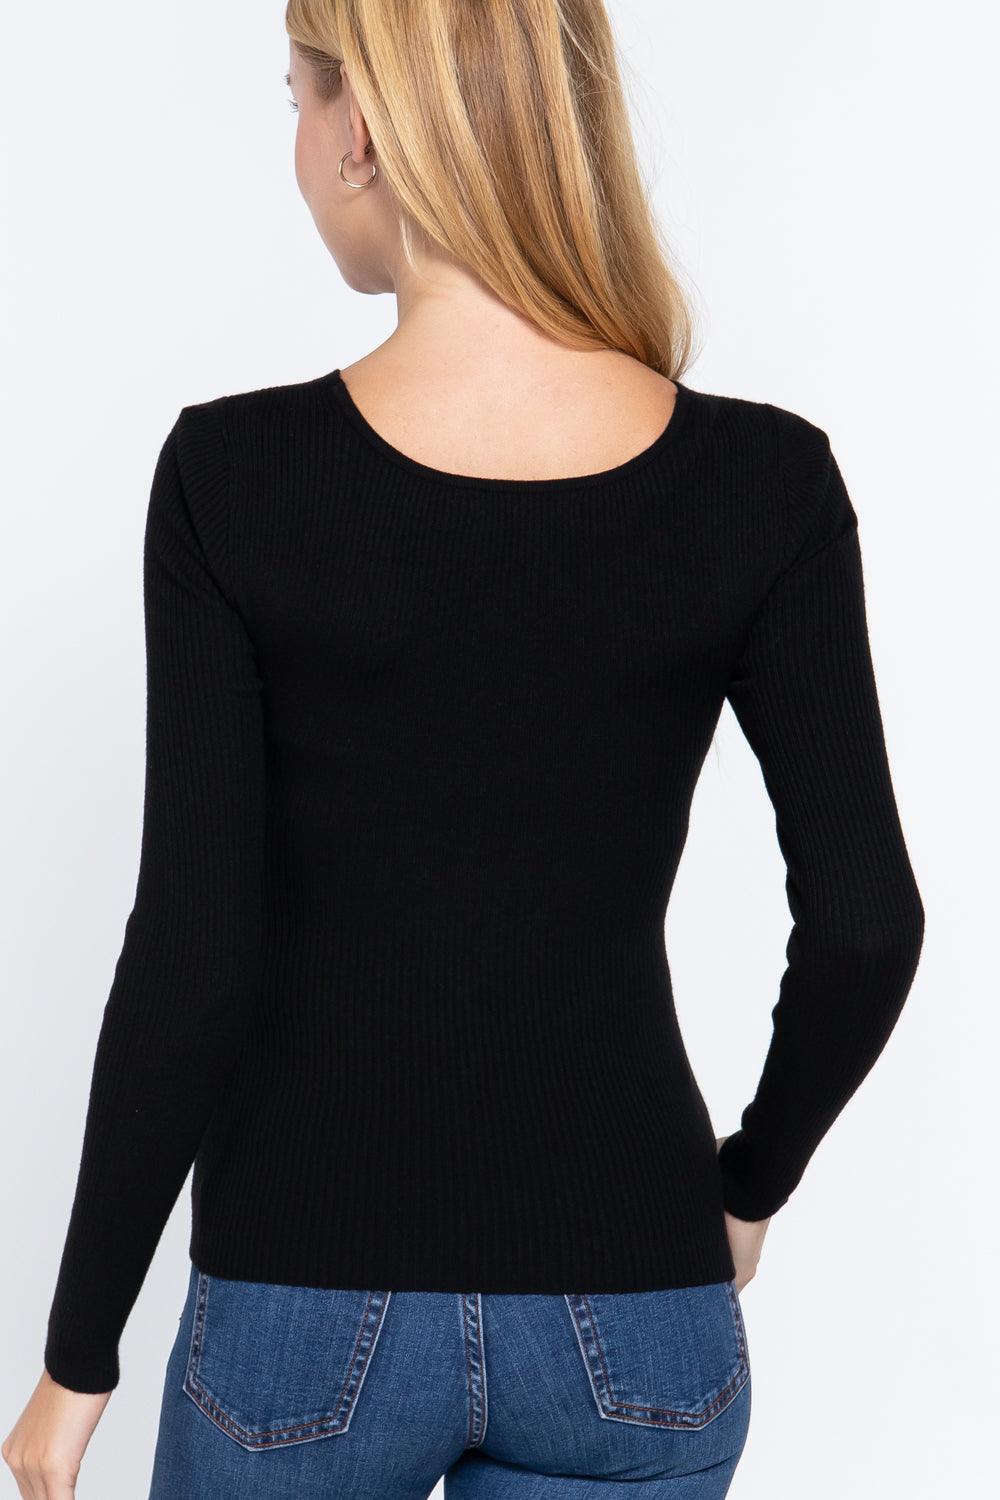 Long Slv V-neck Knotted Sweater Naughty Smile Fashion